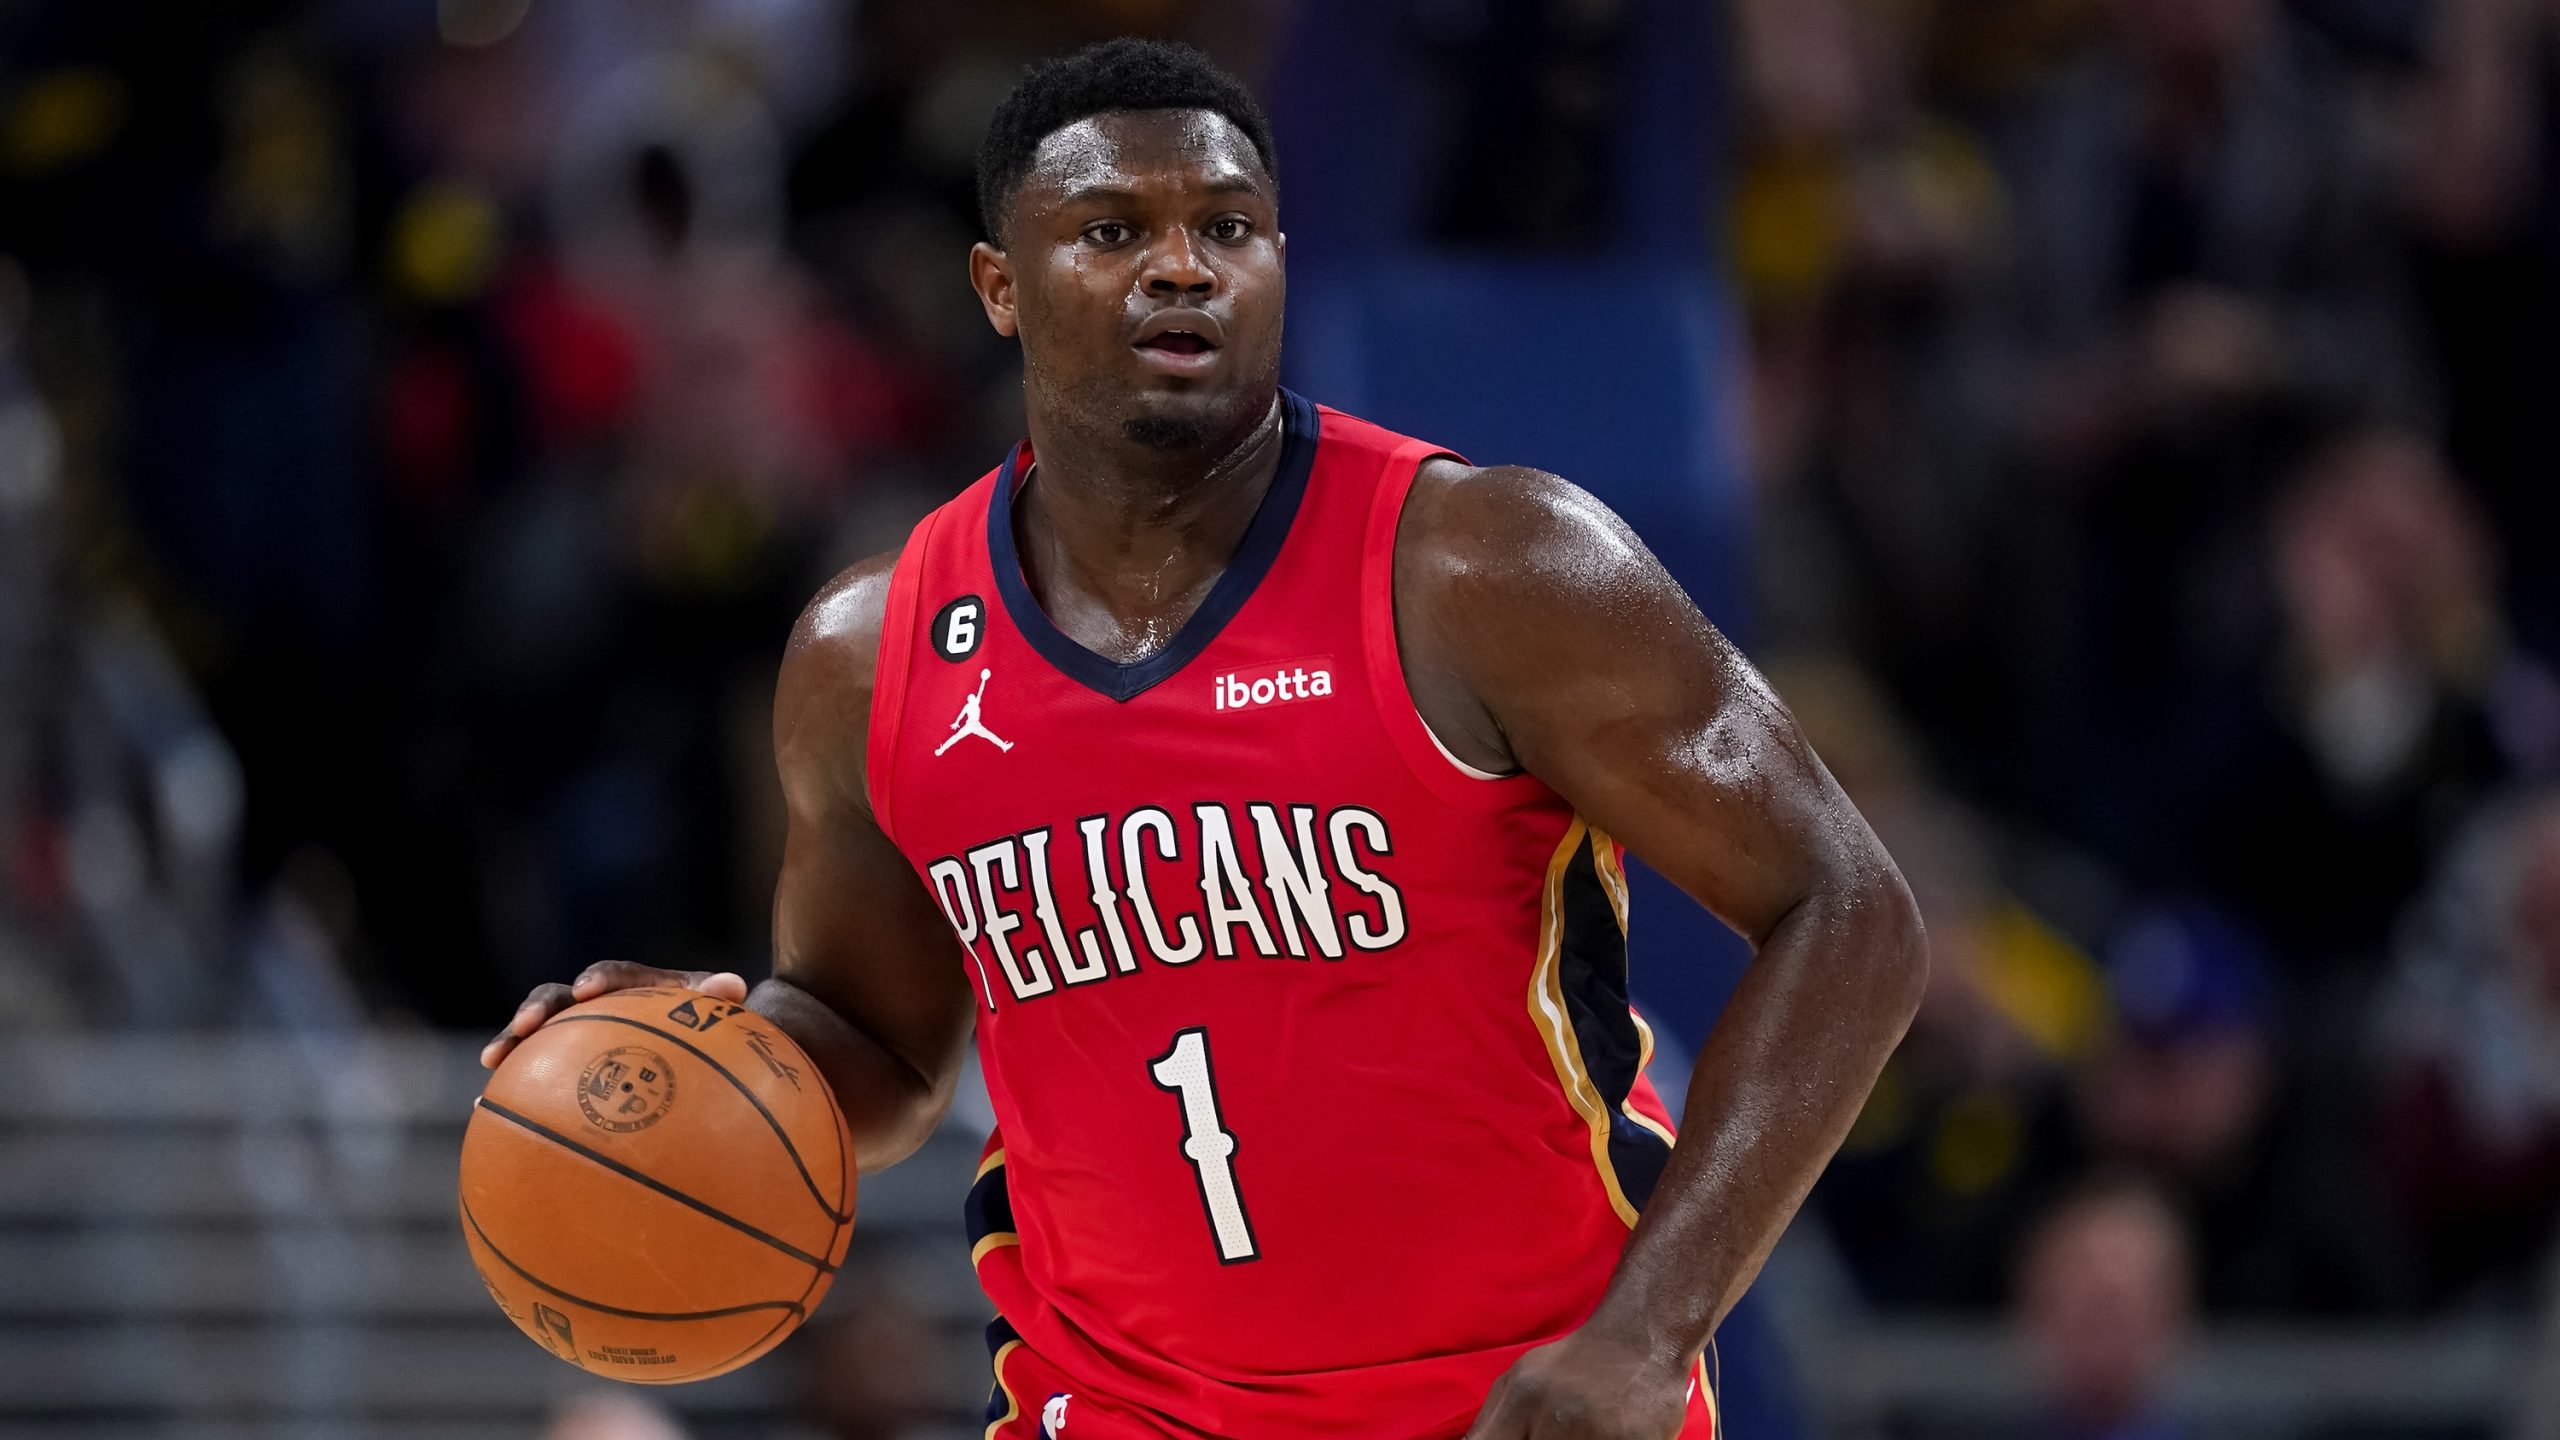 Zion Williamson's Comeback Journey: Overcoming Injuries and Contract Hurdles for NBA Stardom